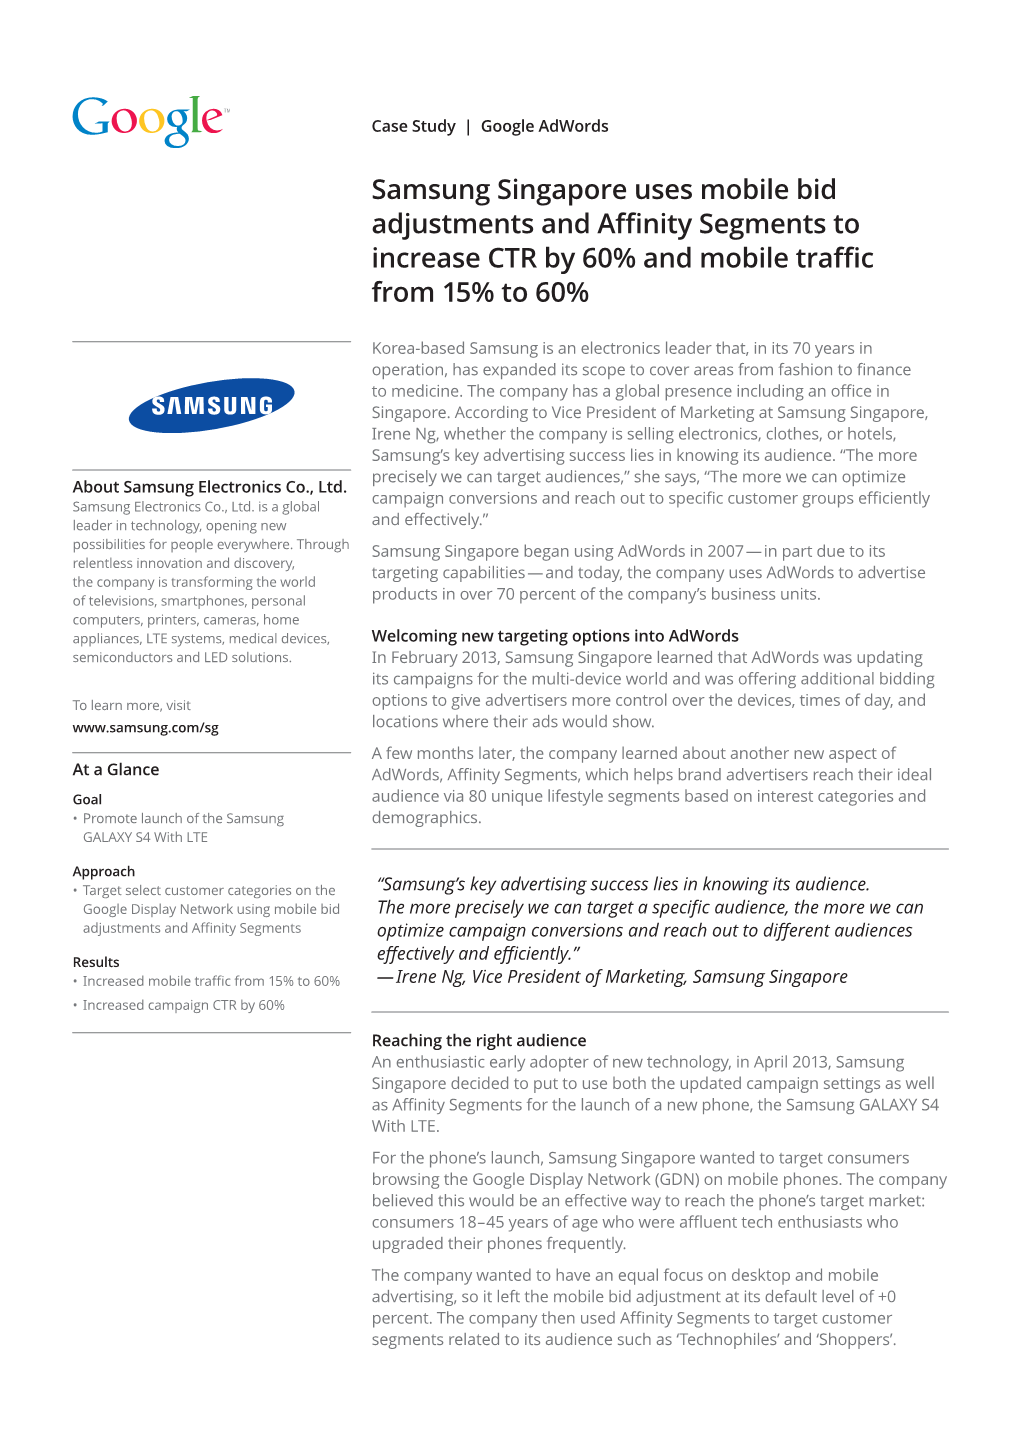 Samsung Singapore Uses Mobile Bid Adjustments and Affinity Segments to Increase CTR by 60% and Mobile Traffic from 15% to 60%